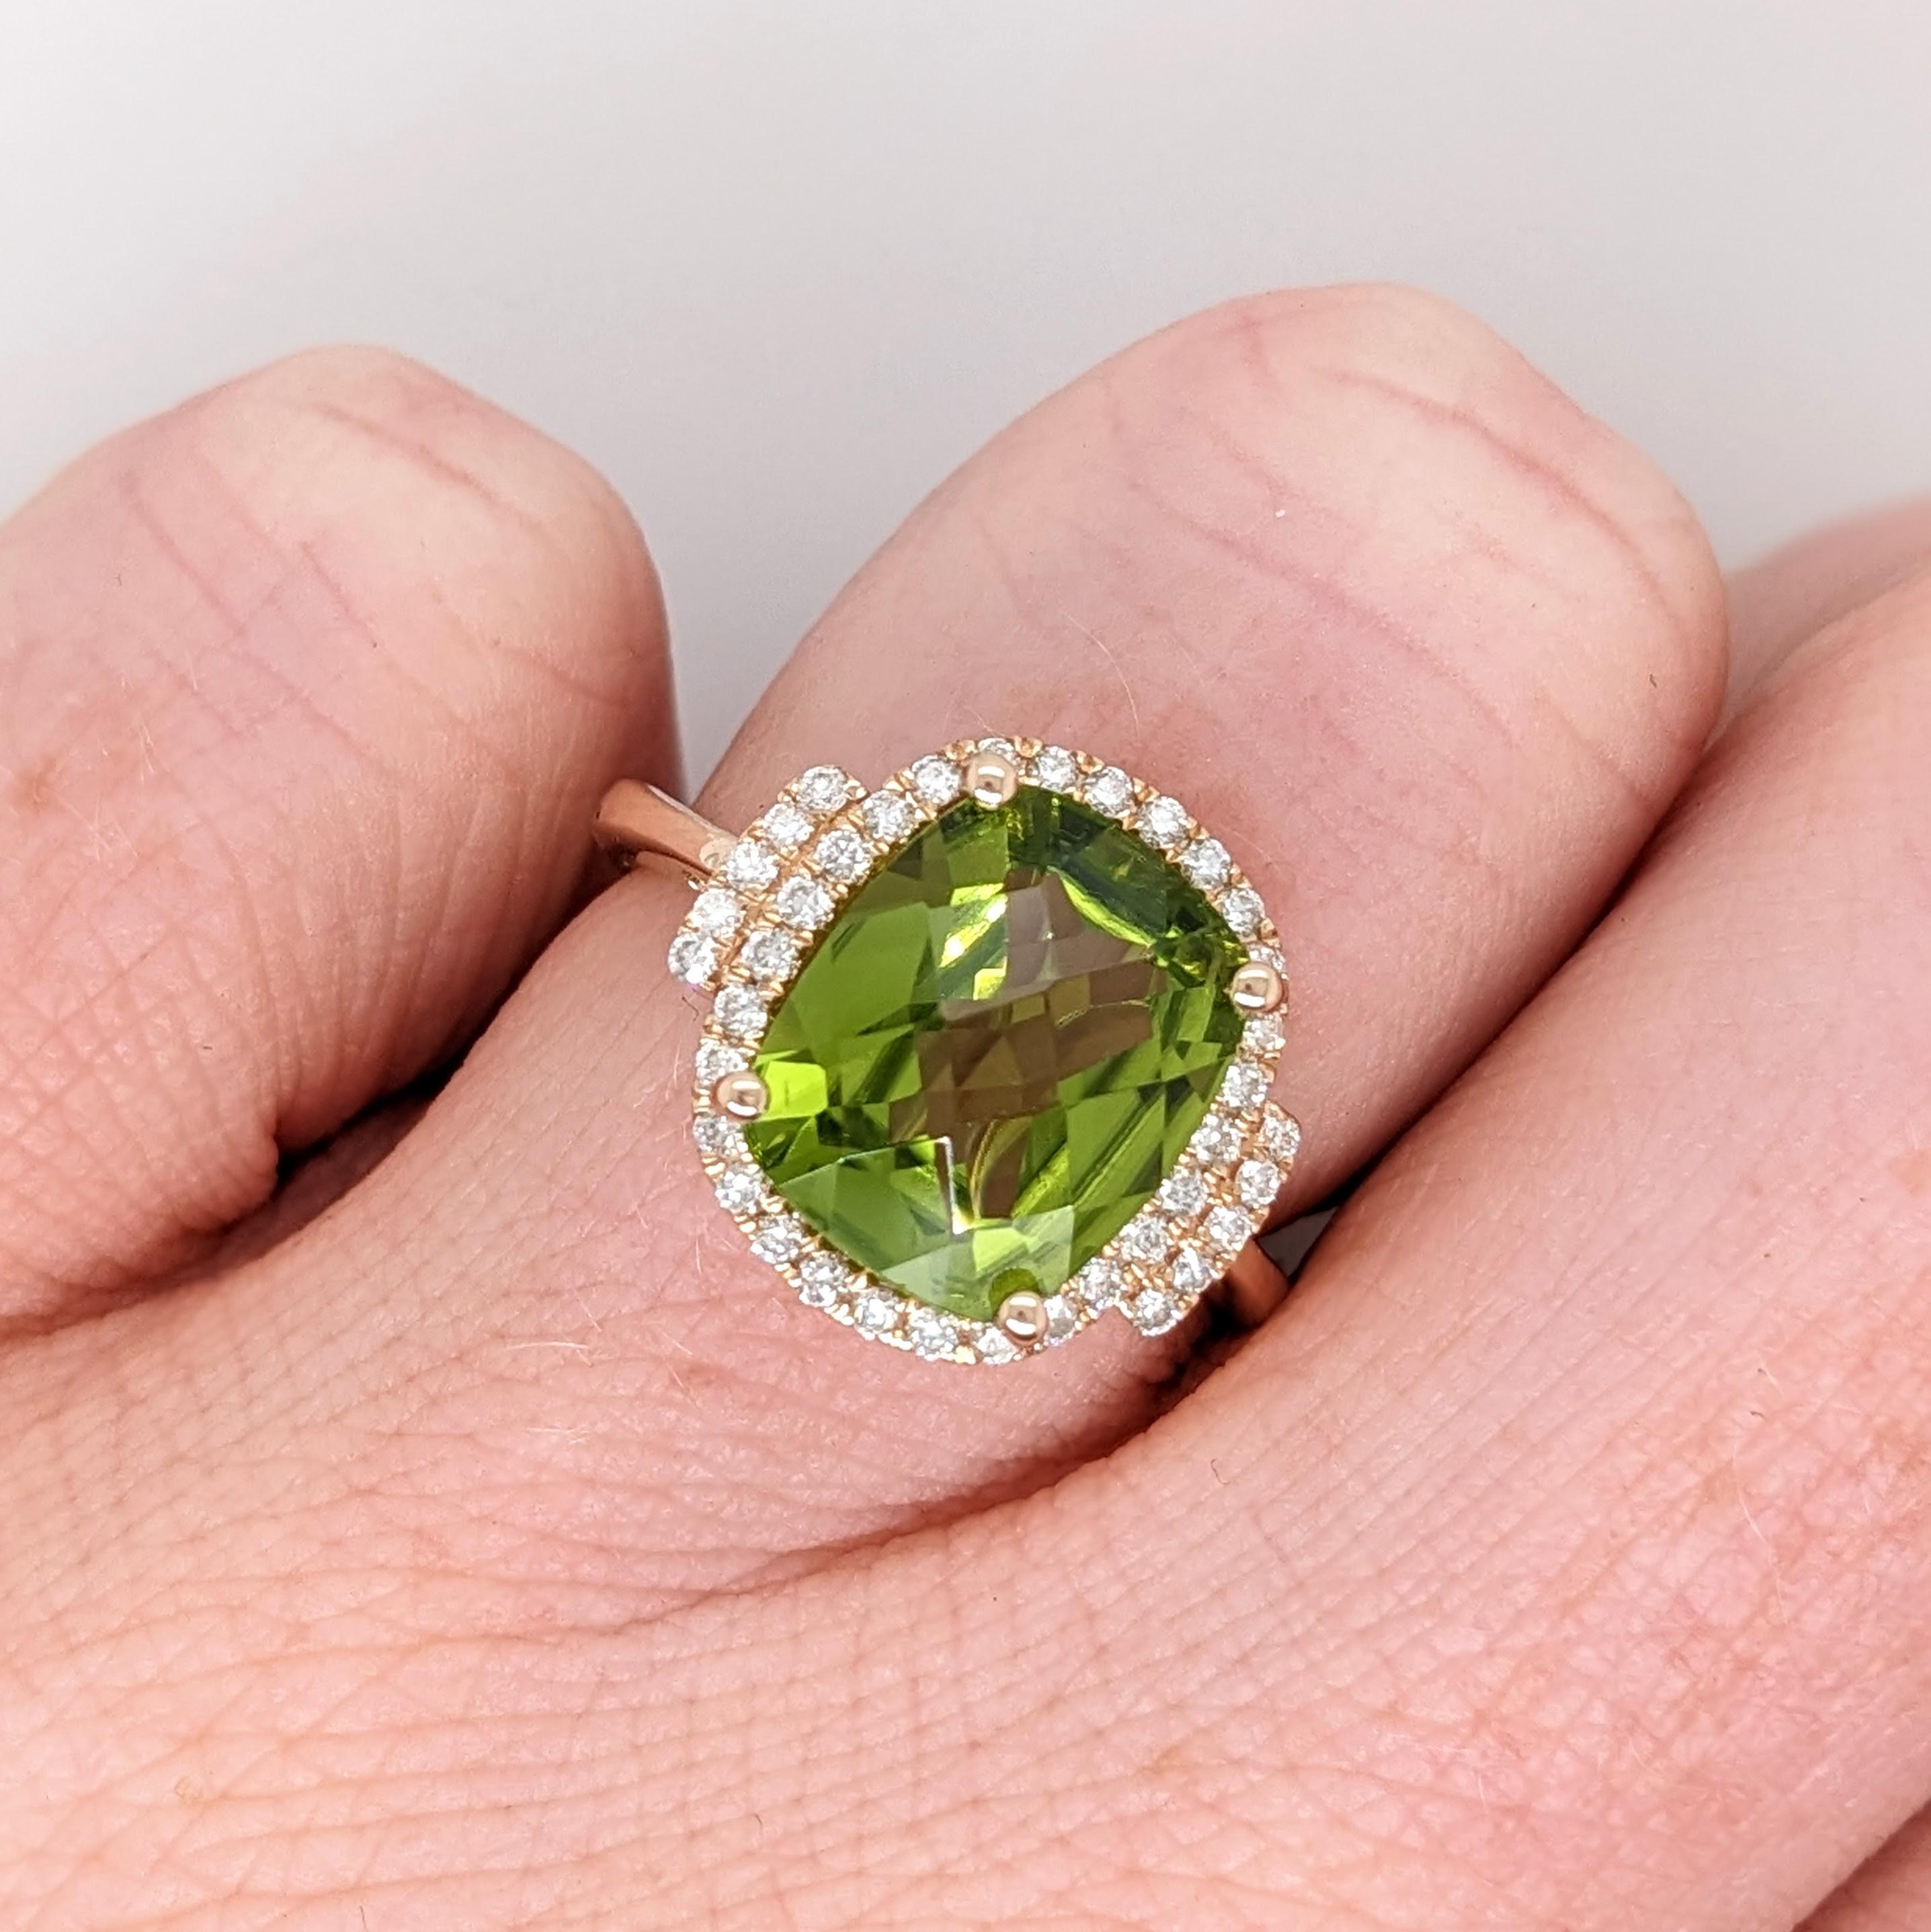 This beautiful ring features a gorgeous 11x9mm 4 carat cushion peridot in a stunning setting made in solid 14k yellow gold with all natural earth mined diamond accents. Enjoy the gorgeous shade of green and beautiful clarity of this natural peridot!